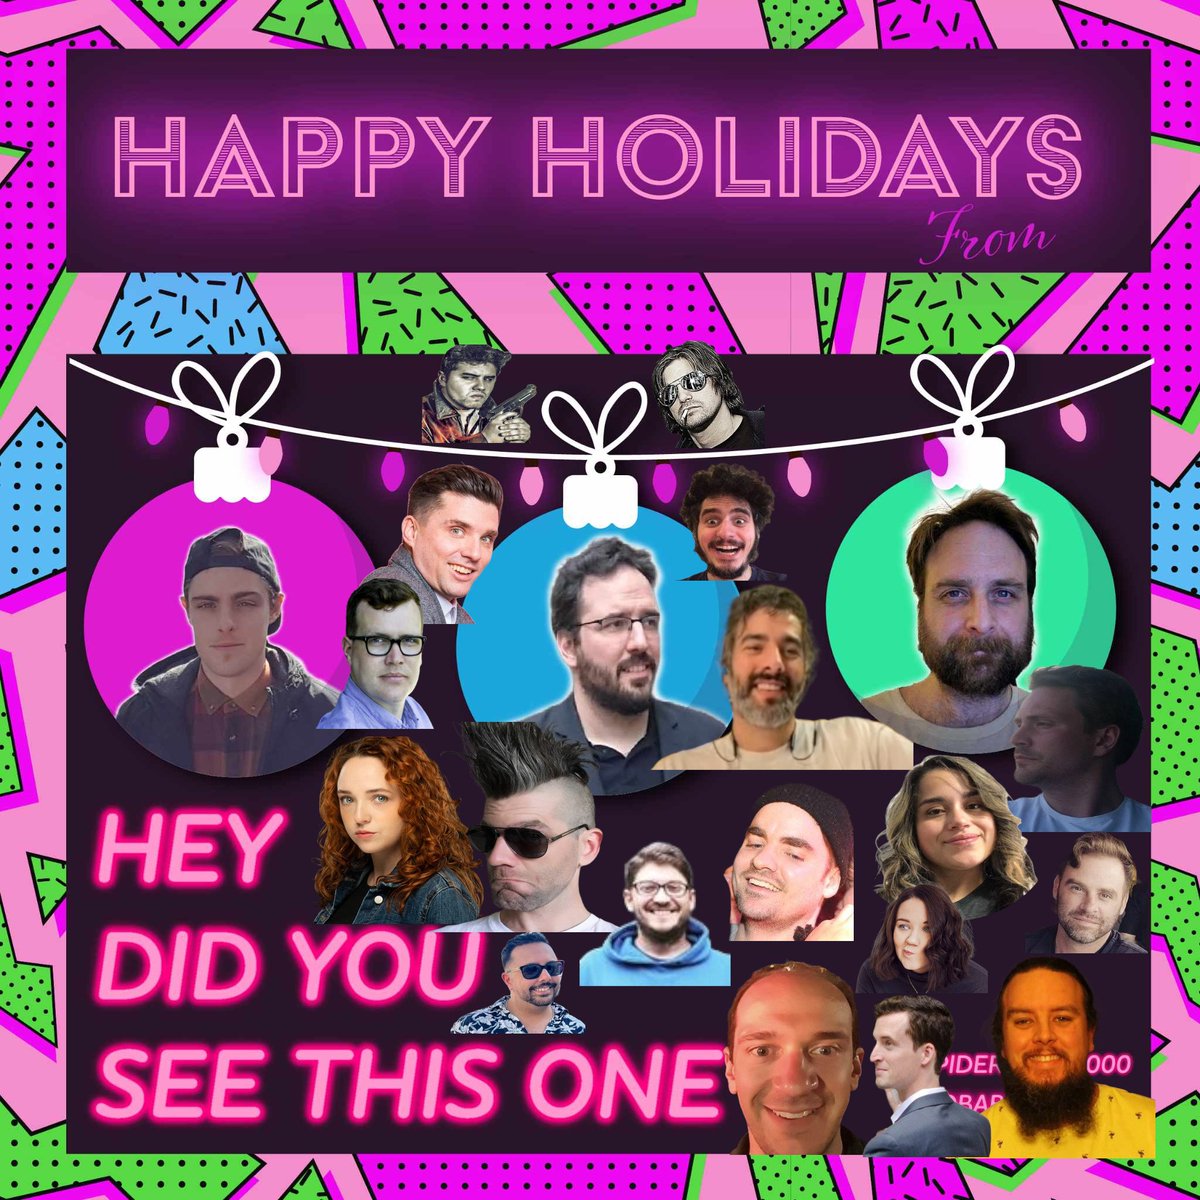 HAPPY HOLIDAYS FROM HEY, DID YOU SEE THIS ONE?

A massive thanks to ALL of our guests so far as well as our former co-host. 

You can find us LIVE every week on TWITCH (link in bio) at 8 PM EST. 

#happyholidays #pod #heydidyouseethisone #YearEnd2023 #namethatfilm #filmreview